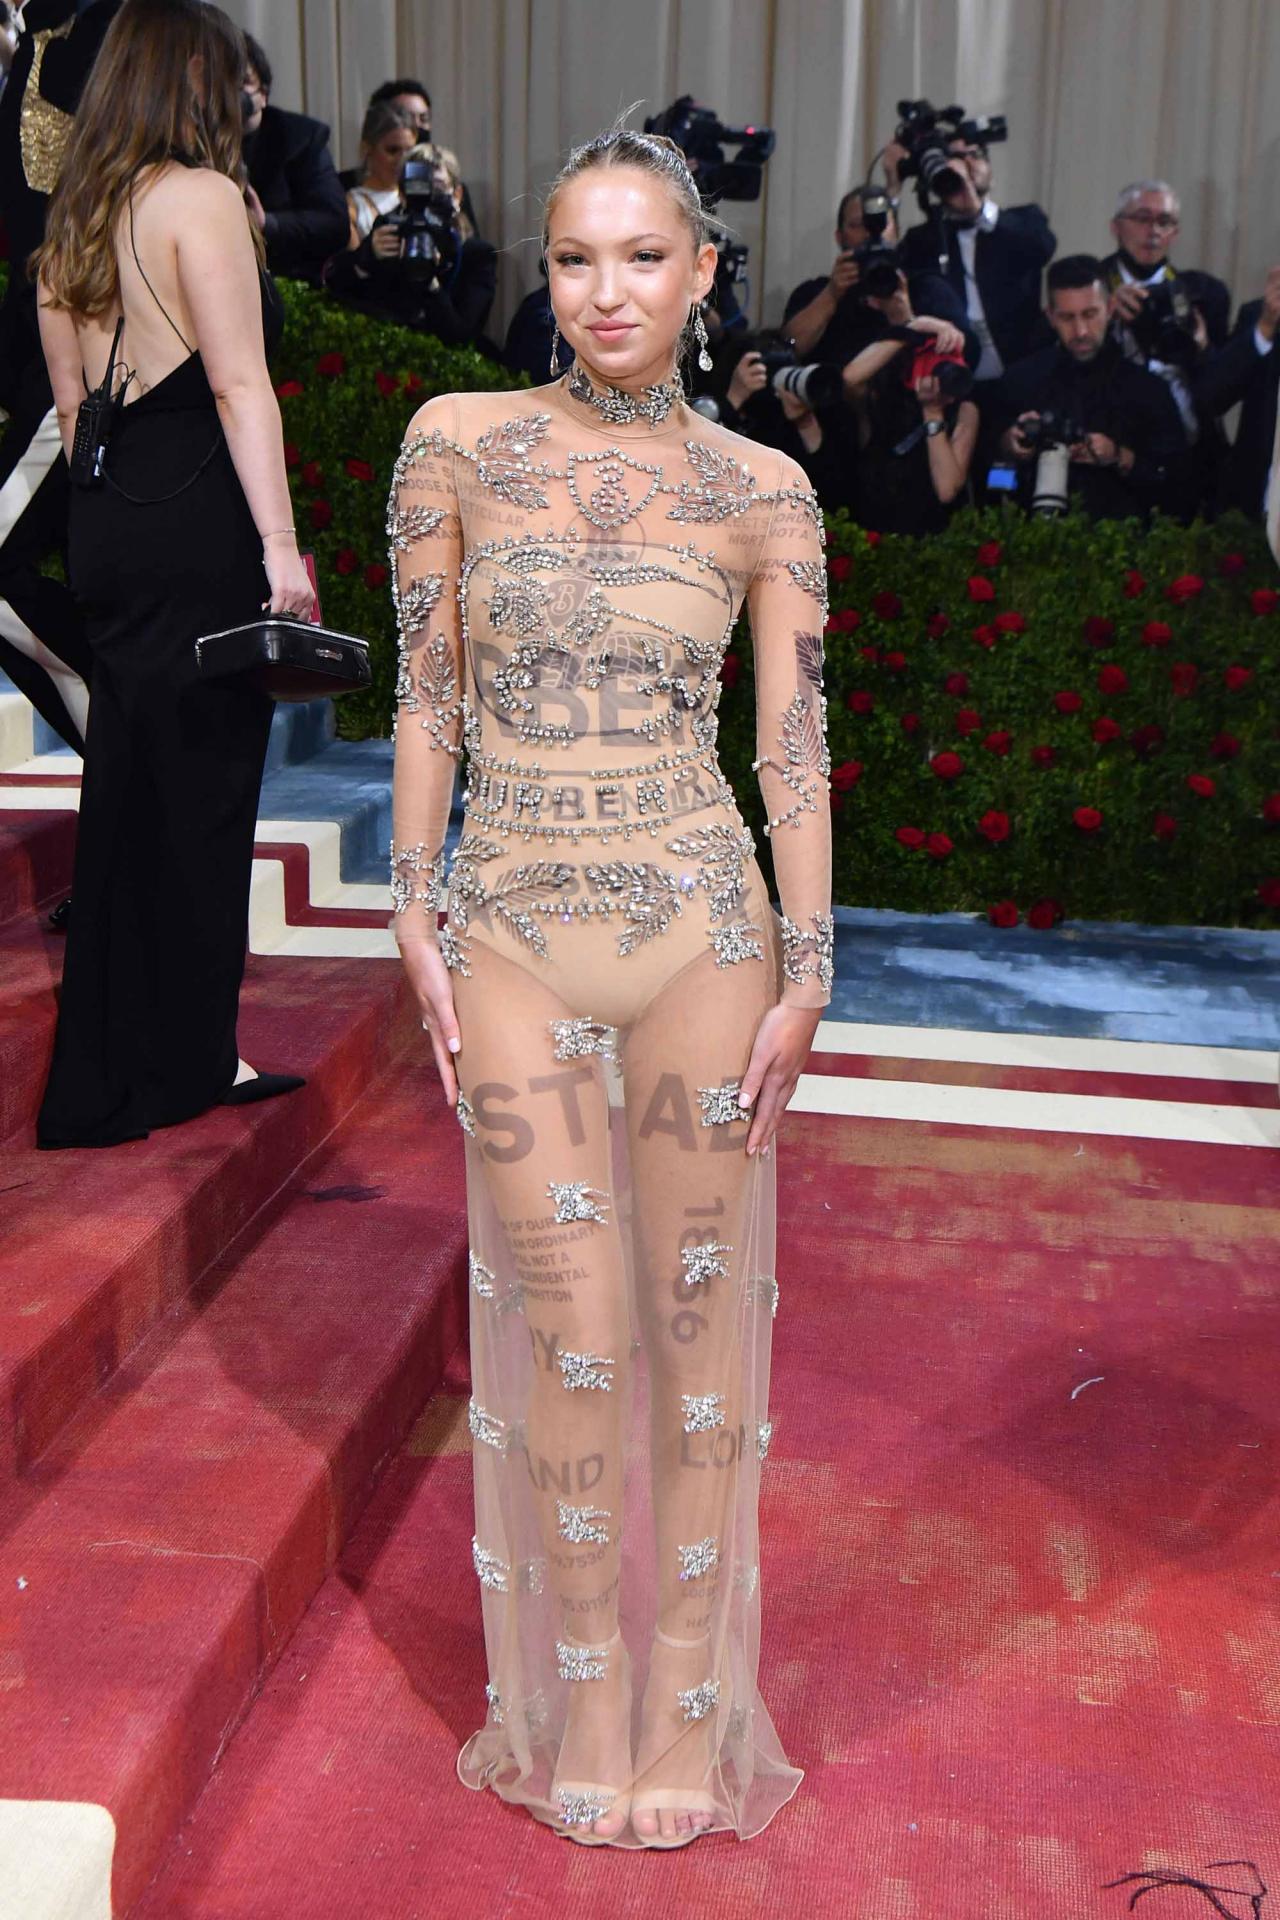 Lila Grace Moss arrives for the 2022 Met Gala at the Metropolitan Museum of Art on May 2, 2022, in New York. - The Gala raises money for the Metropolitan Museum of Art's Costume Institute. The Gala's 2022 theme is "In America: An Anthology of Fashion". (Photo by ANGELA  WEISS / AFP)